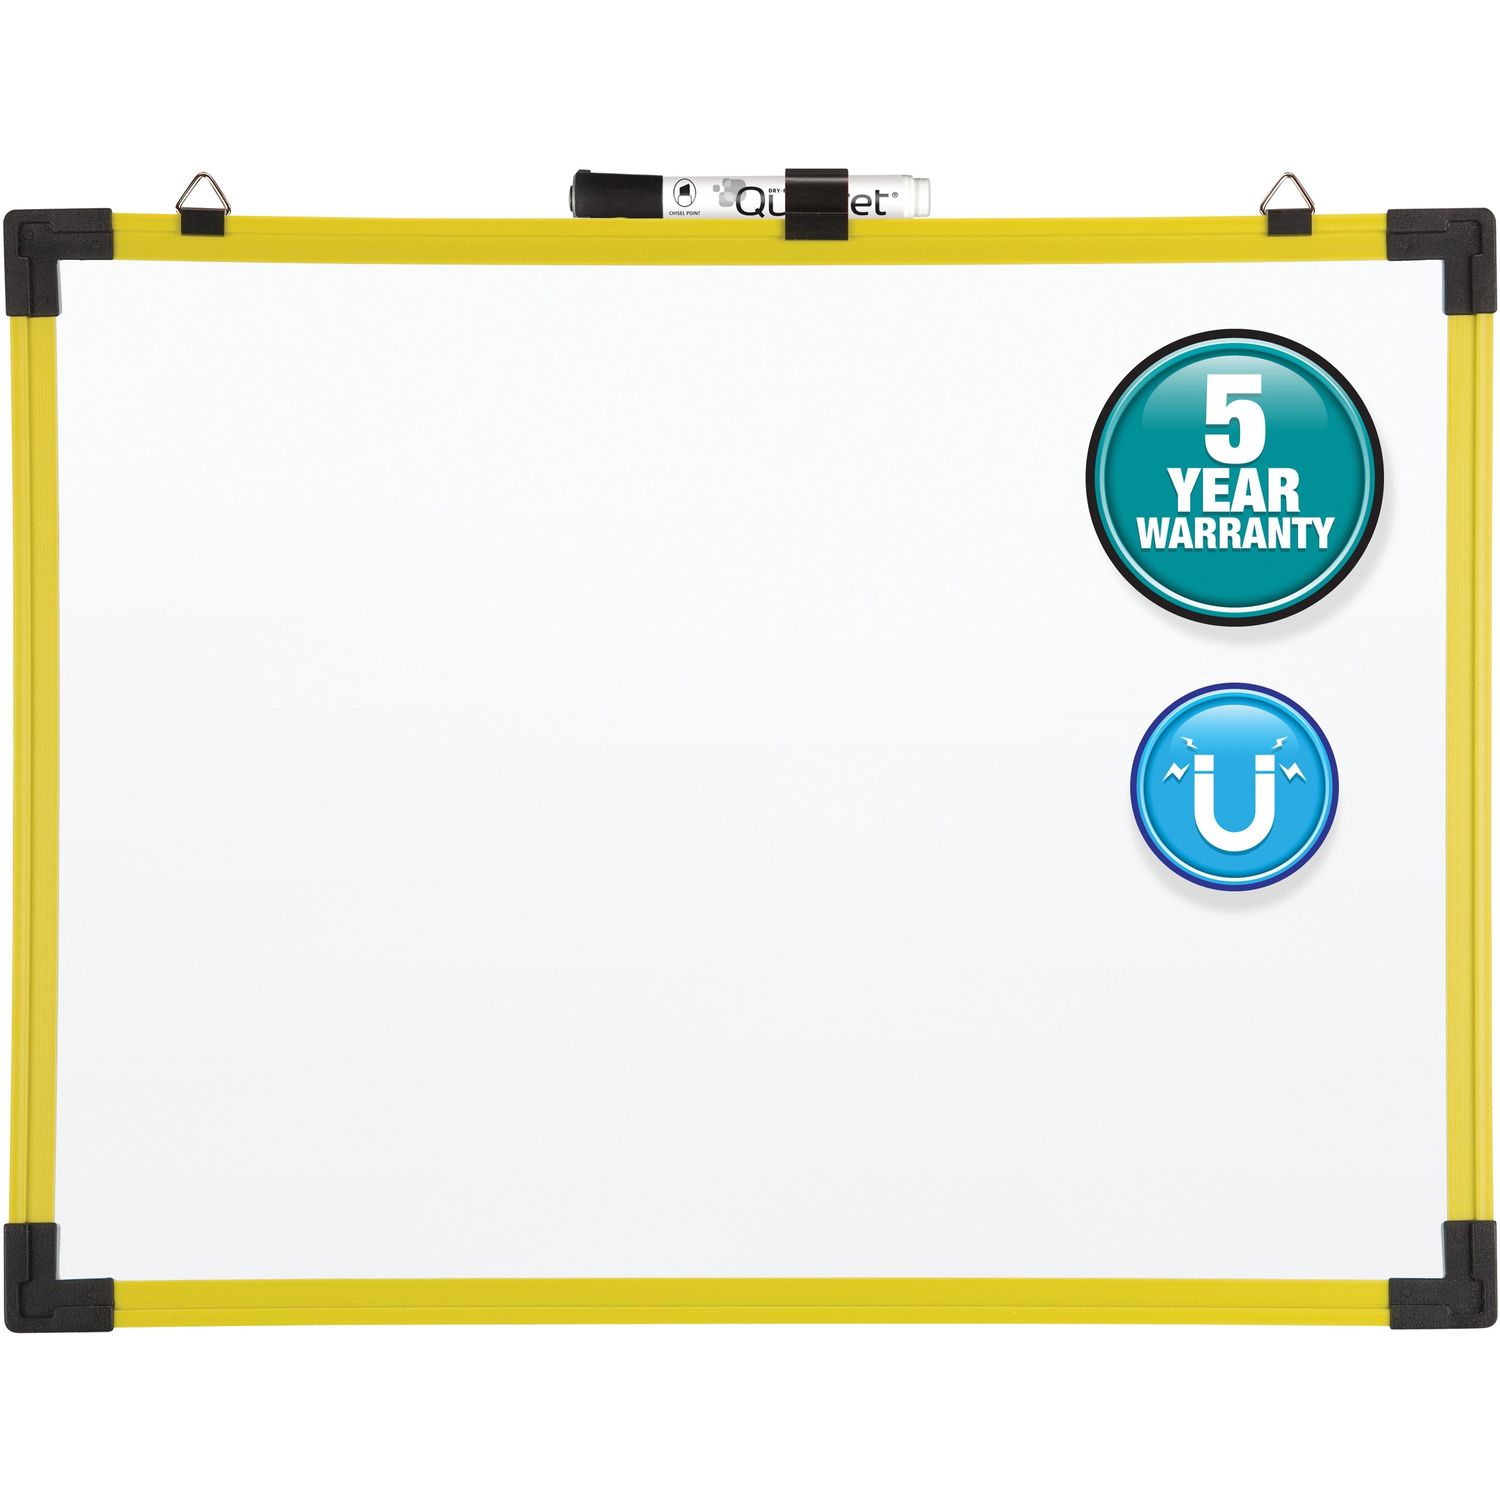 Industrial Magnetic Whiteboard 72" (6 ft) Width x 48" (4 ft) Height, White Painted Steel Surface, Bright Yellow Aluminum Frame, Rectangle, Horizontal, Mount, 1 Each